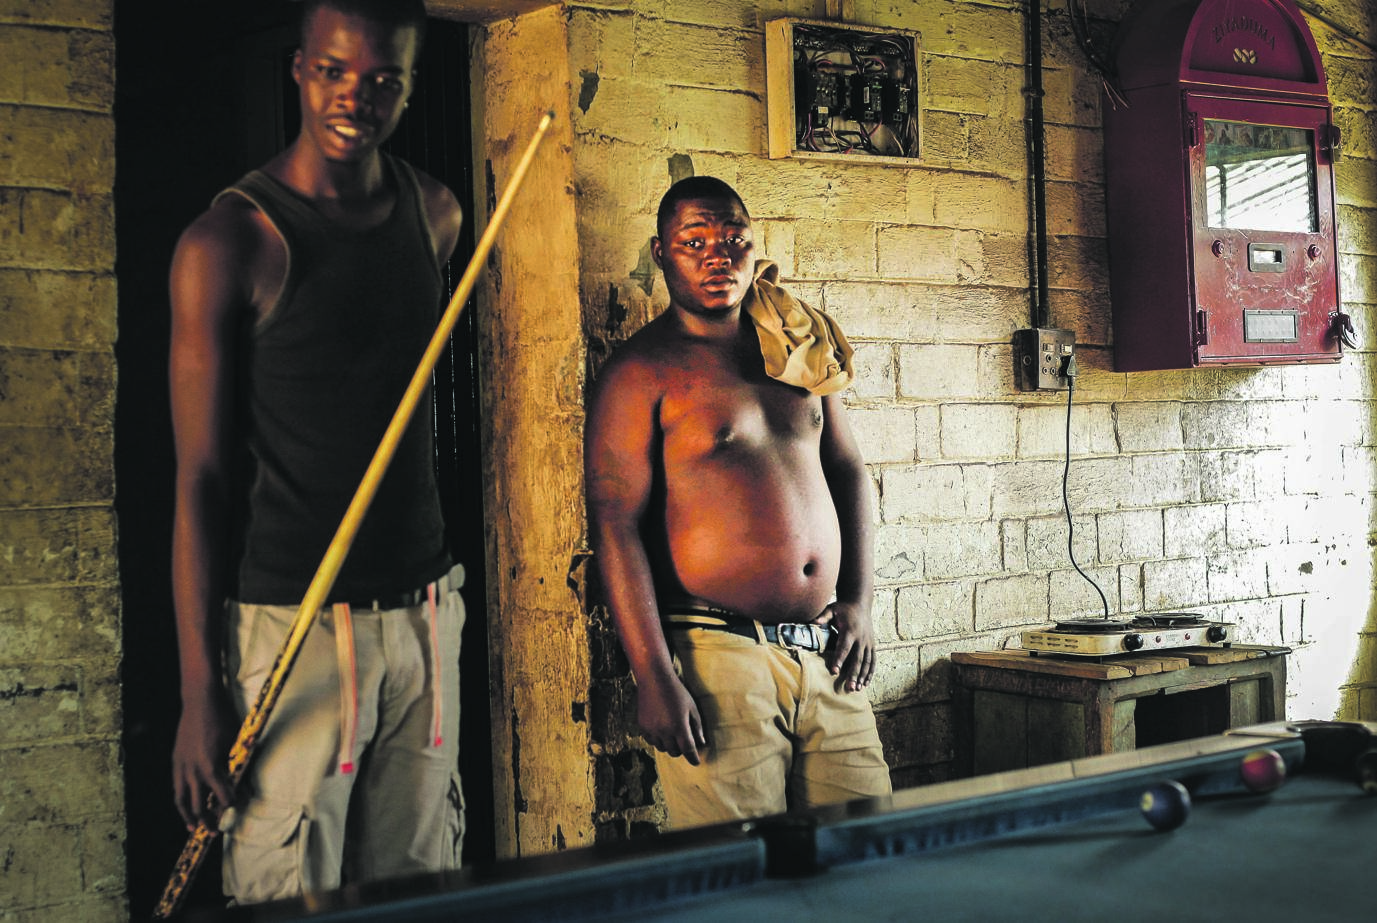 Sithembiso Madondo (left) and Thandani Dladla play pool at Ndana Tavern in Soweto during a week day. Scores of jobless people wander around their townships just to pass the time as their prospects of finding employment diminish by the day Picture: Mpumelelo Buthelezi